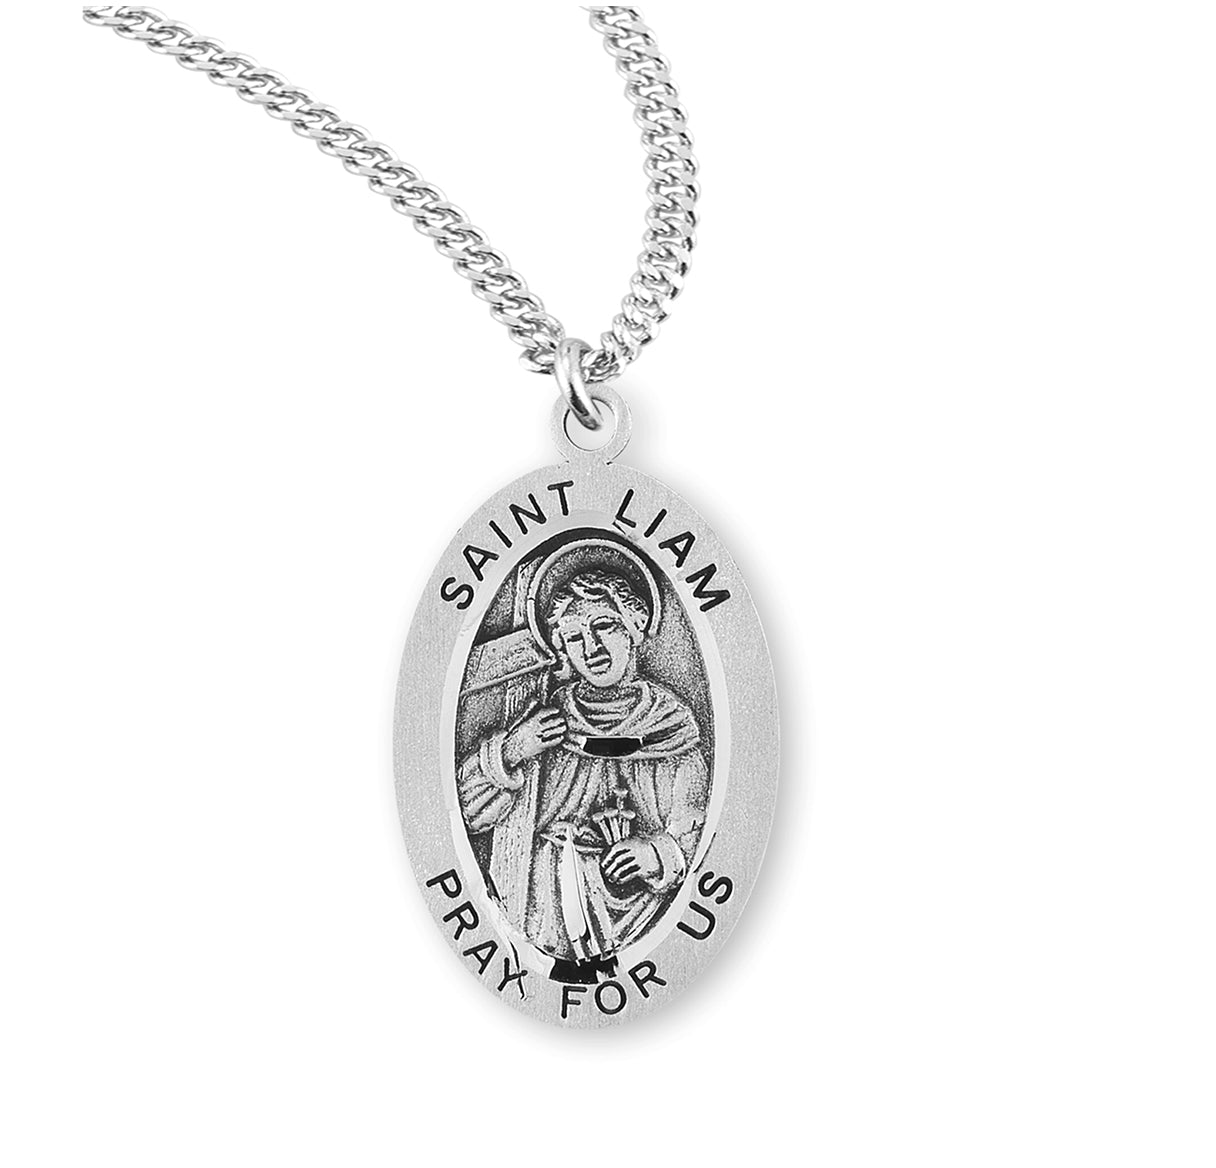 Patron Saint Liam Oval Sterling Silver Medal